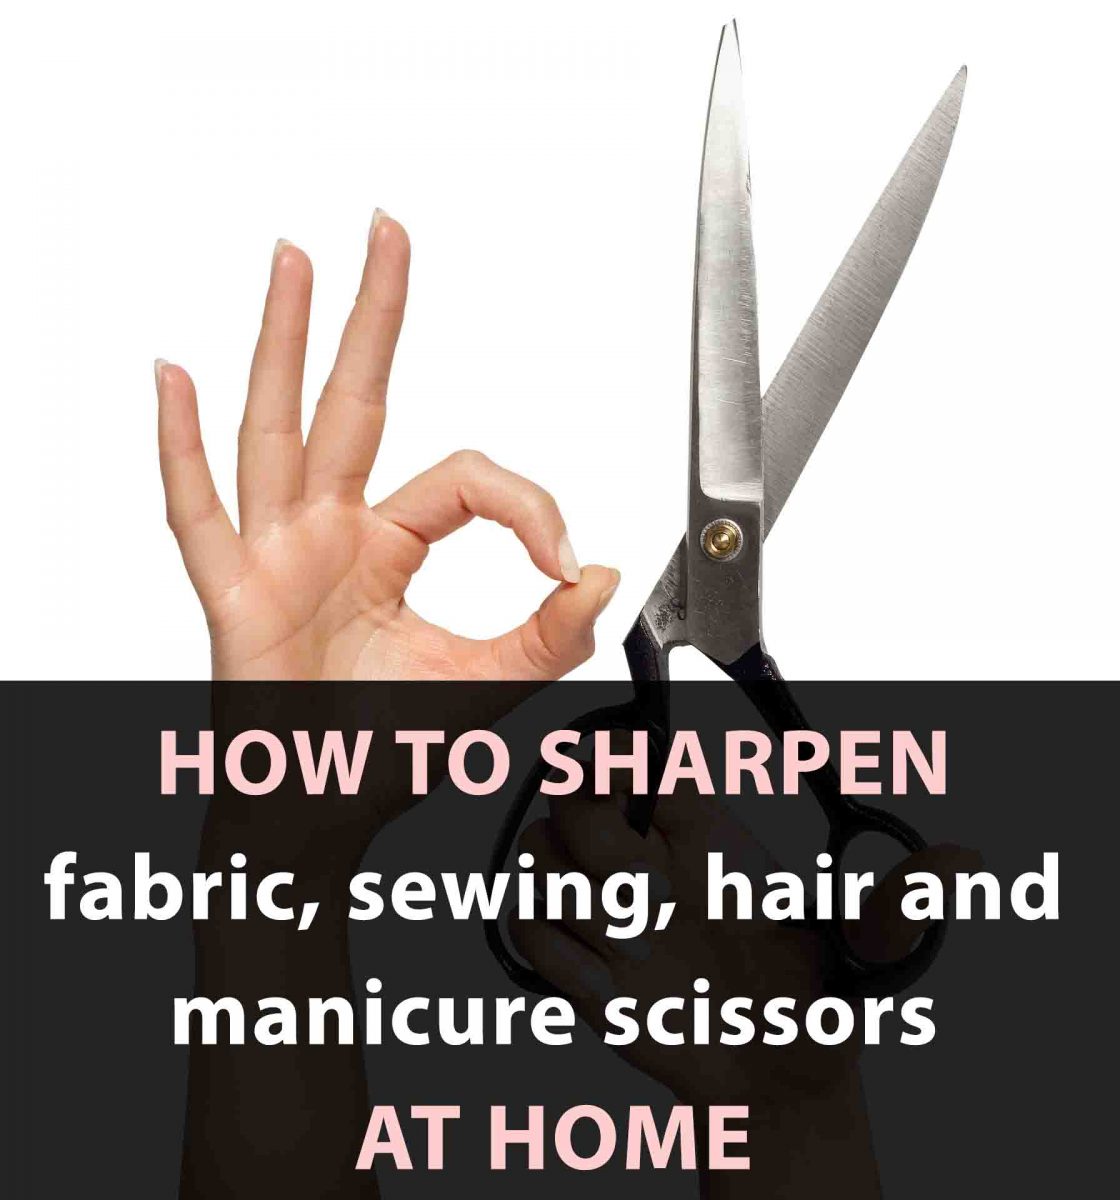 How to sharpen scissors at home (hair, fabric, sewing and manicure)